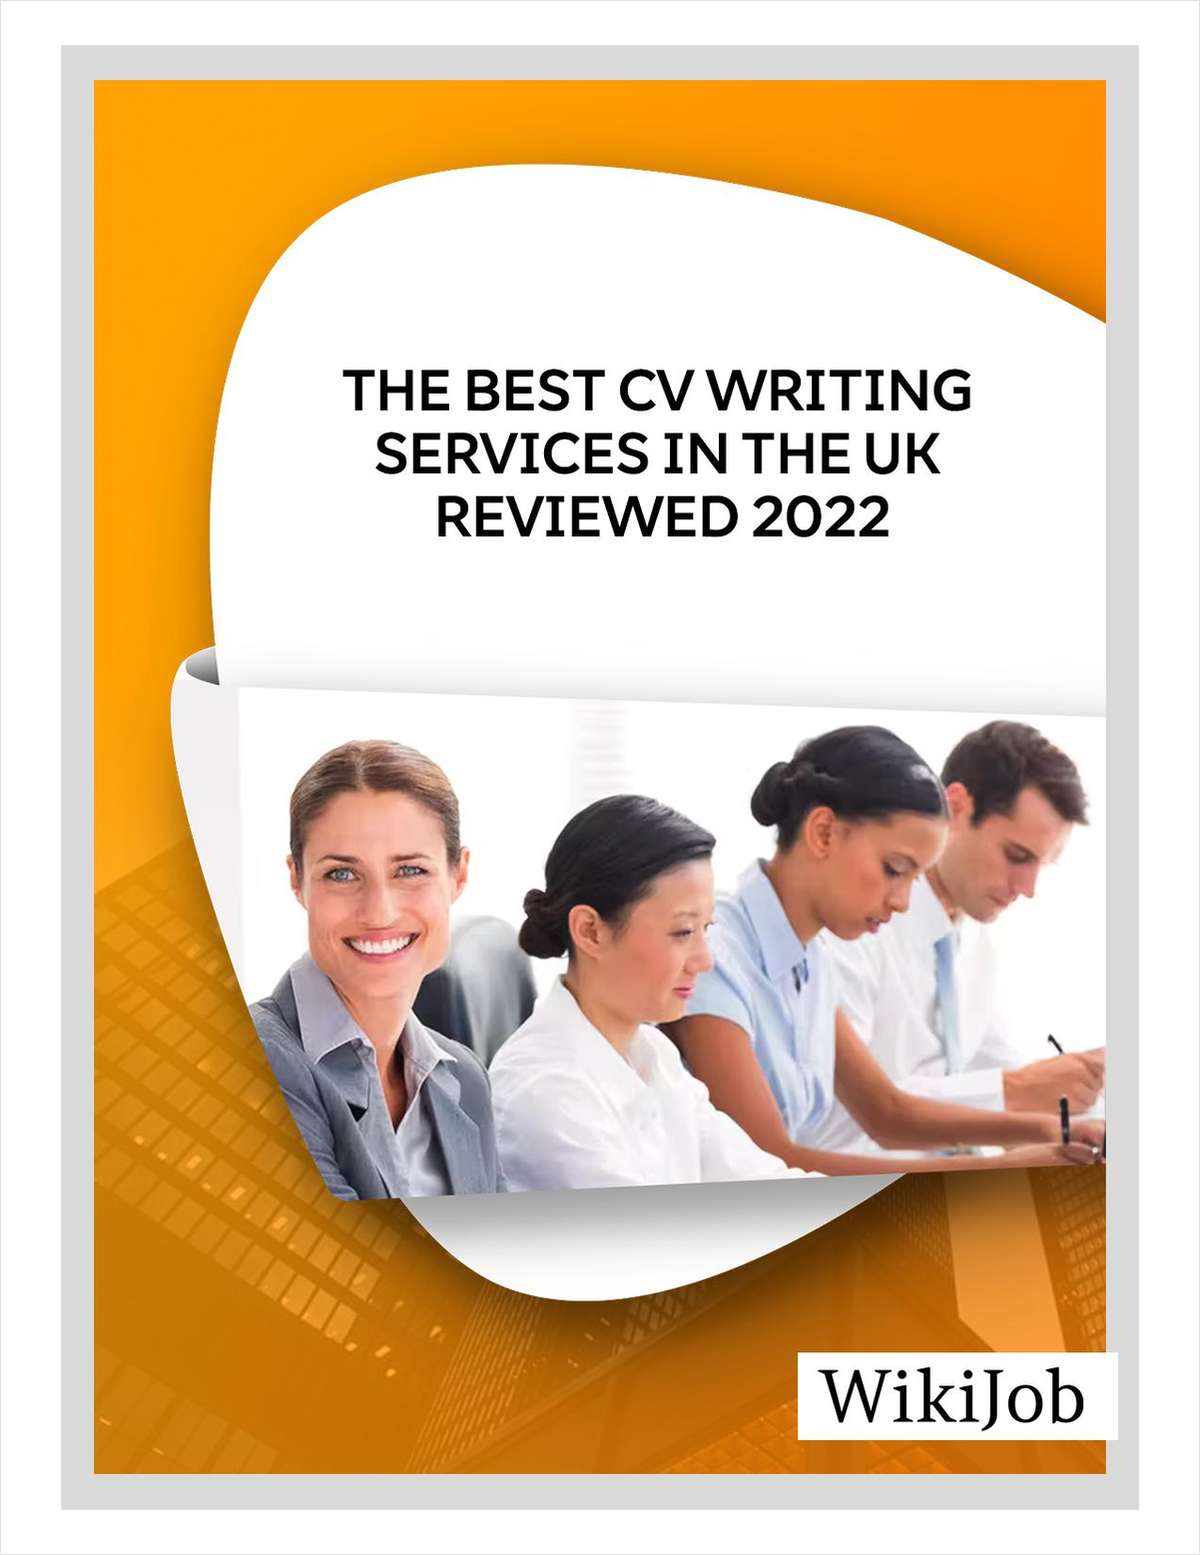 The Best CV Writing Services in the UK Reviewed 2022